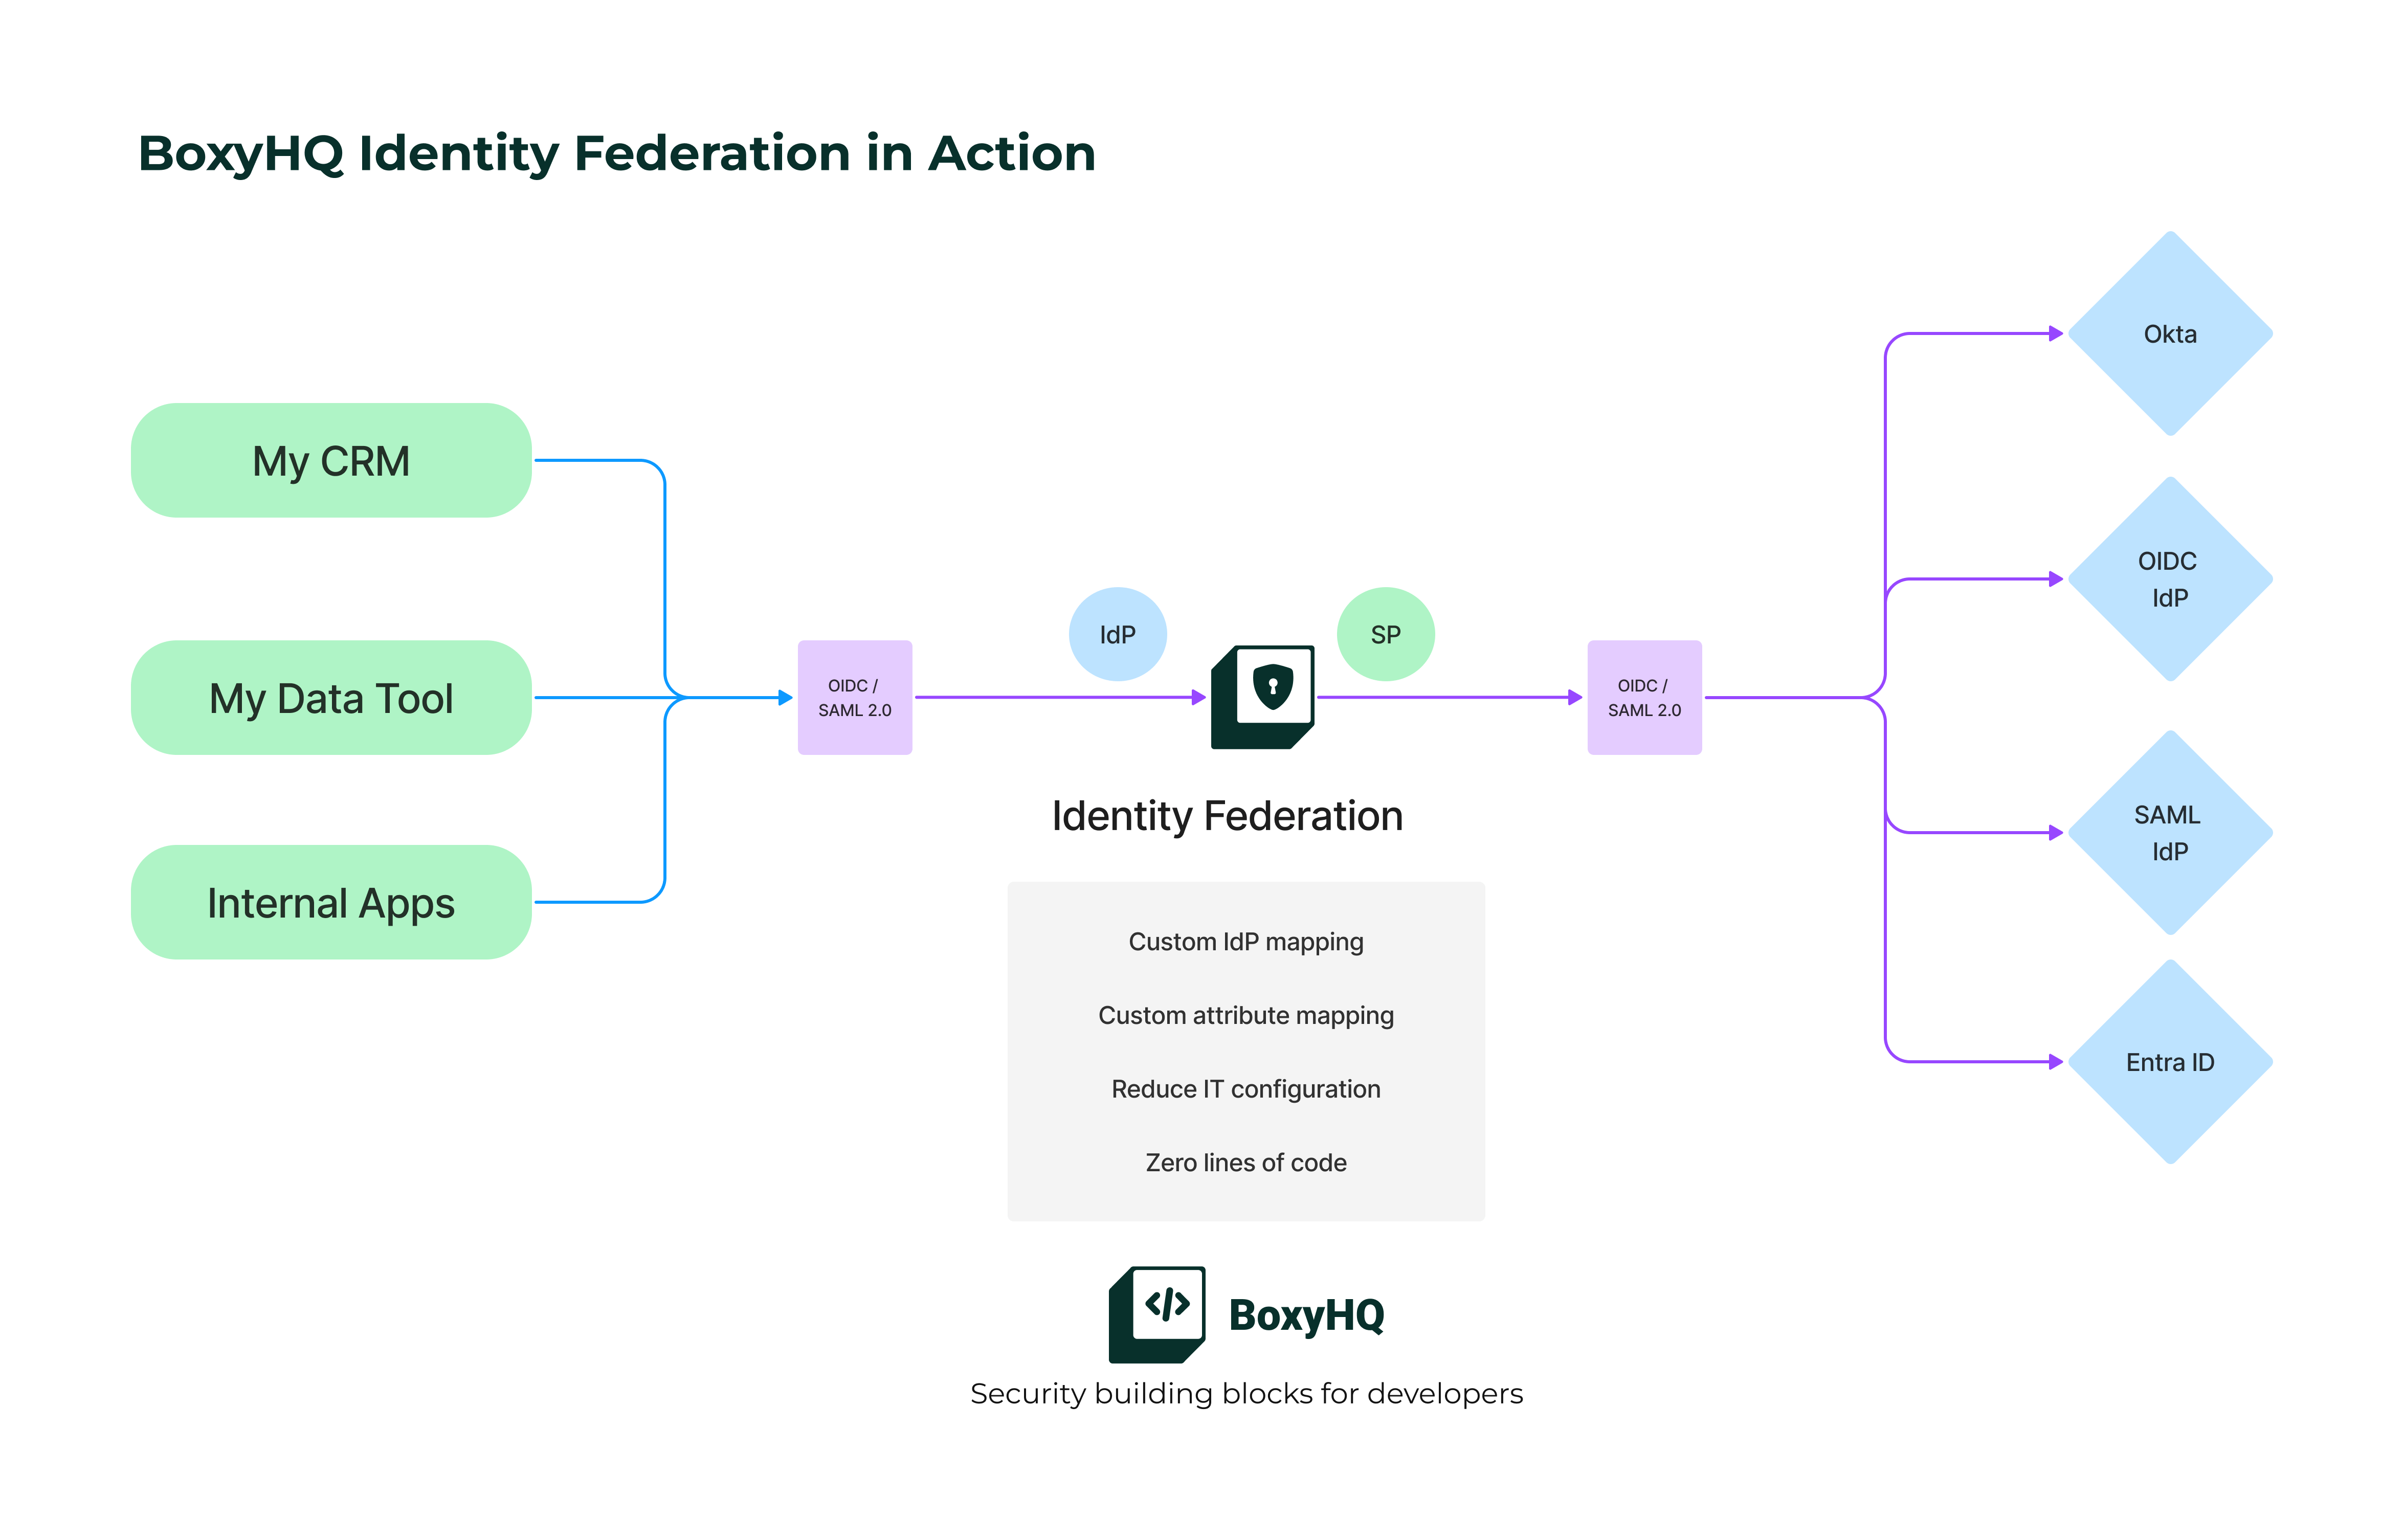 The image displays BoxyHQ&#39;s Identity Federation solution, which allows internal applications like CRM and data tools to connect with various identity providers (IdPs) like Okta, OIDC, SAML, and Entra ID through a secure proxy. This proxy handles custom IdP mapping, attribute mapping, and reduces IT configuration complexity while requiring zero code changes. The solution enables seamless identity management across diverse customer-facing applications with different identity protocols.